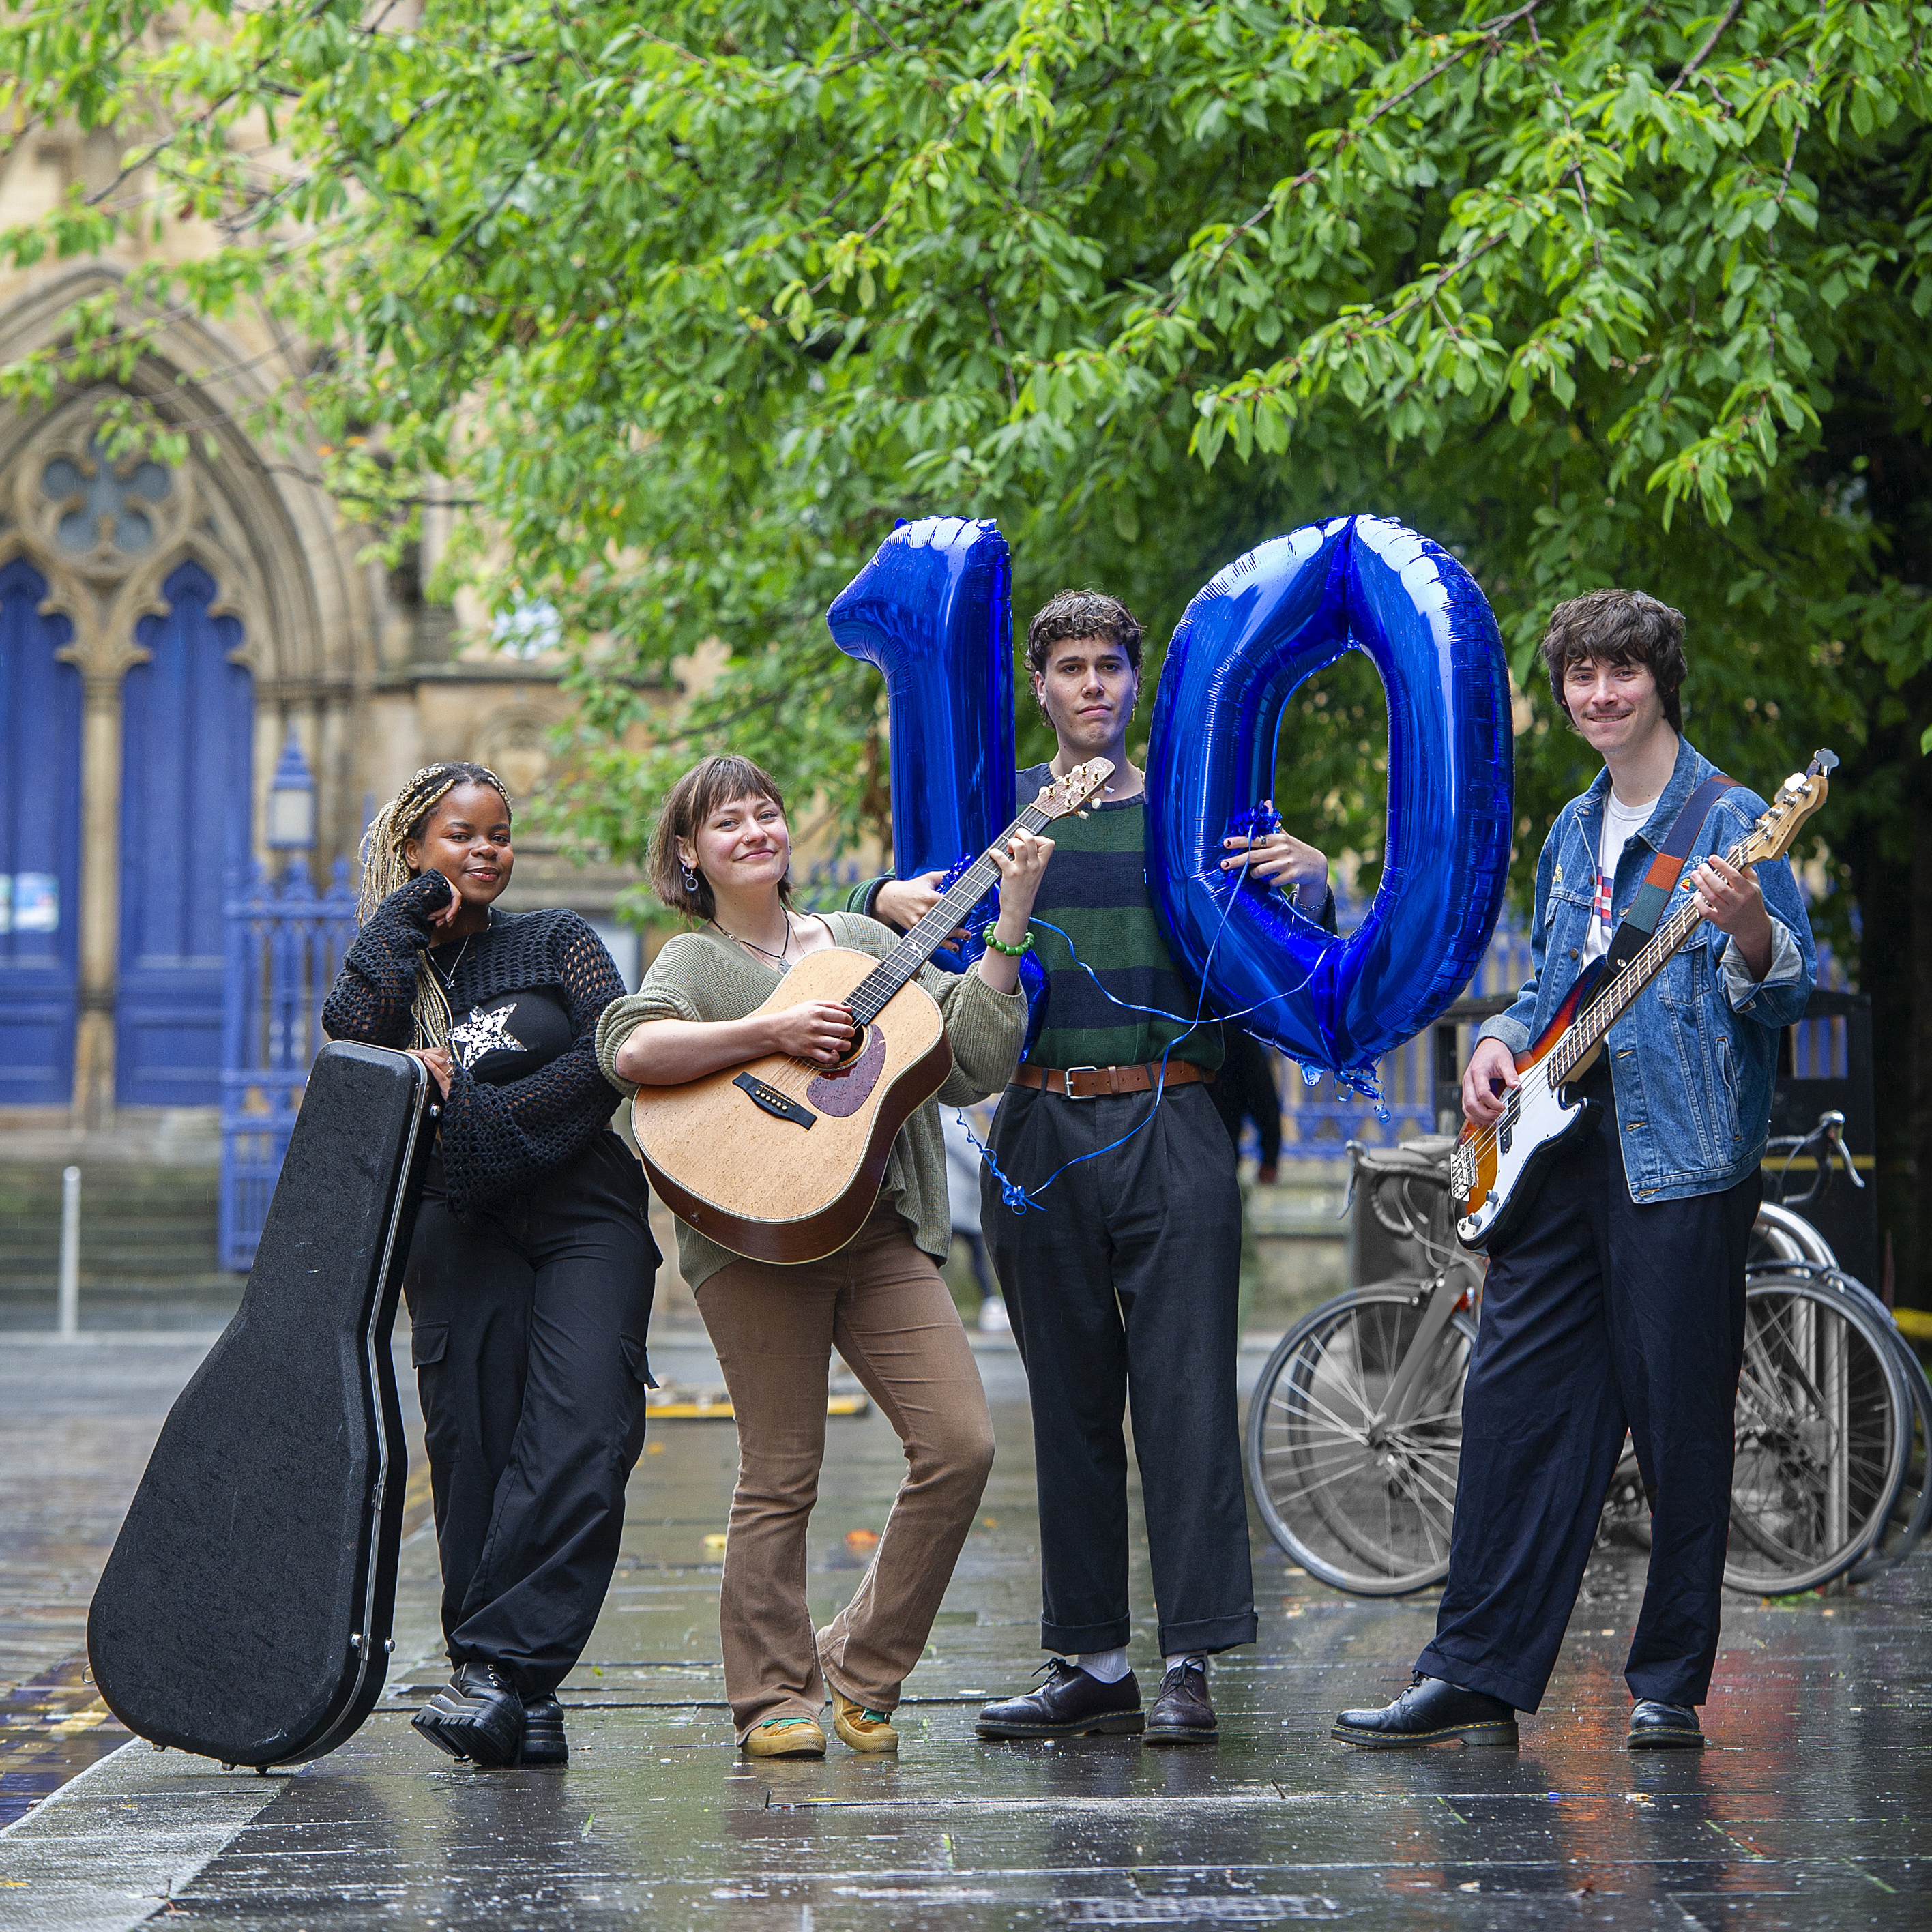 Four people stand outside in front of leafy green trees. They hold guitars, while another has two blue balloons in the shape of a one and zero